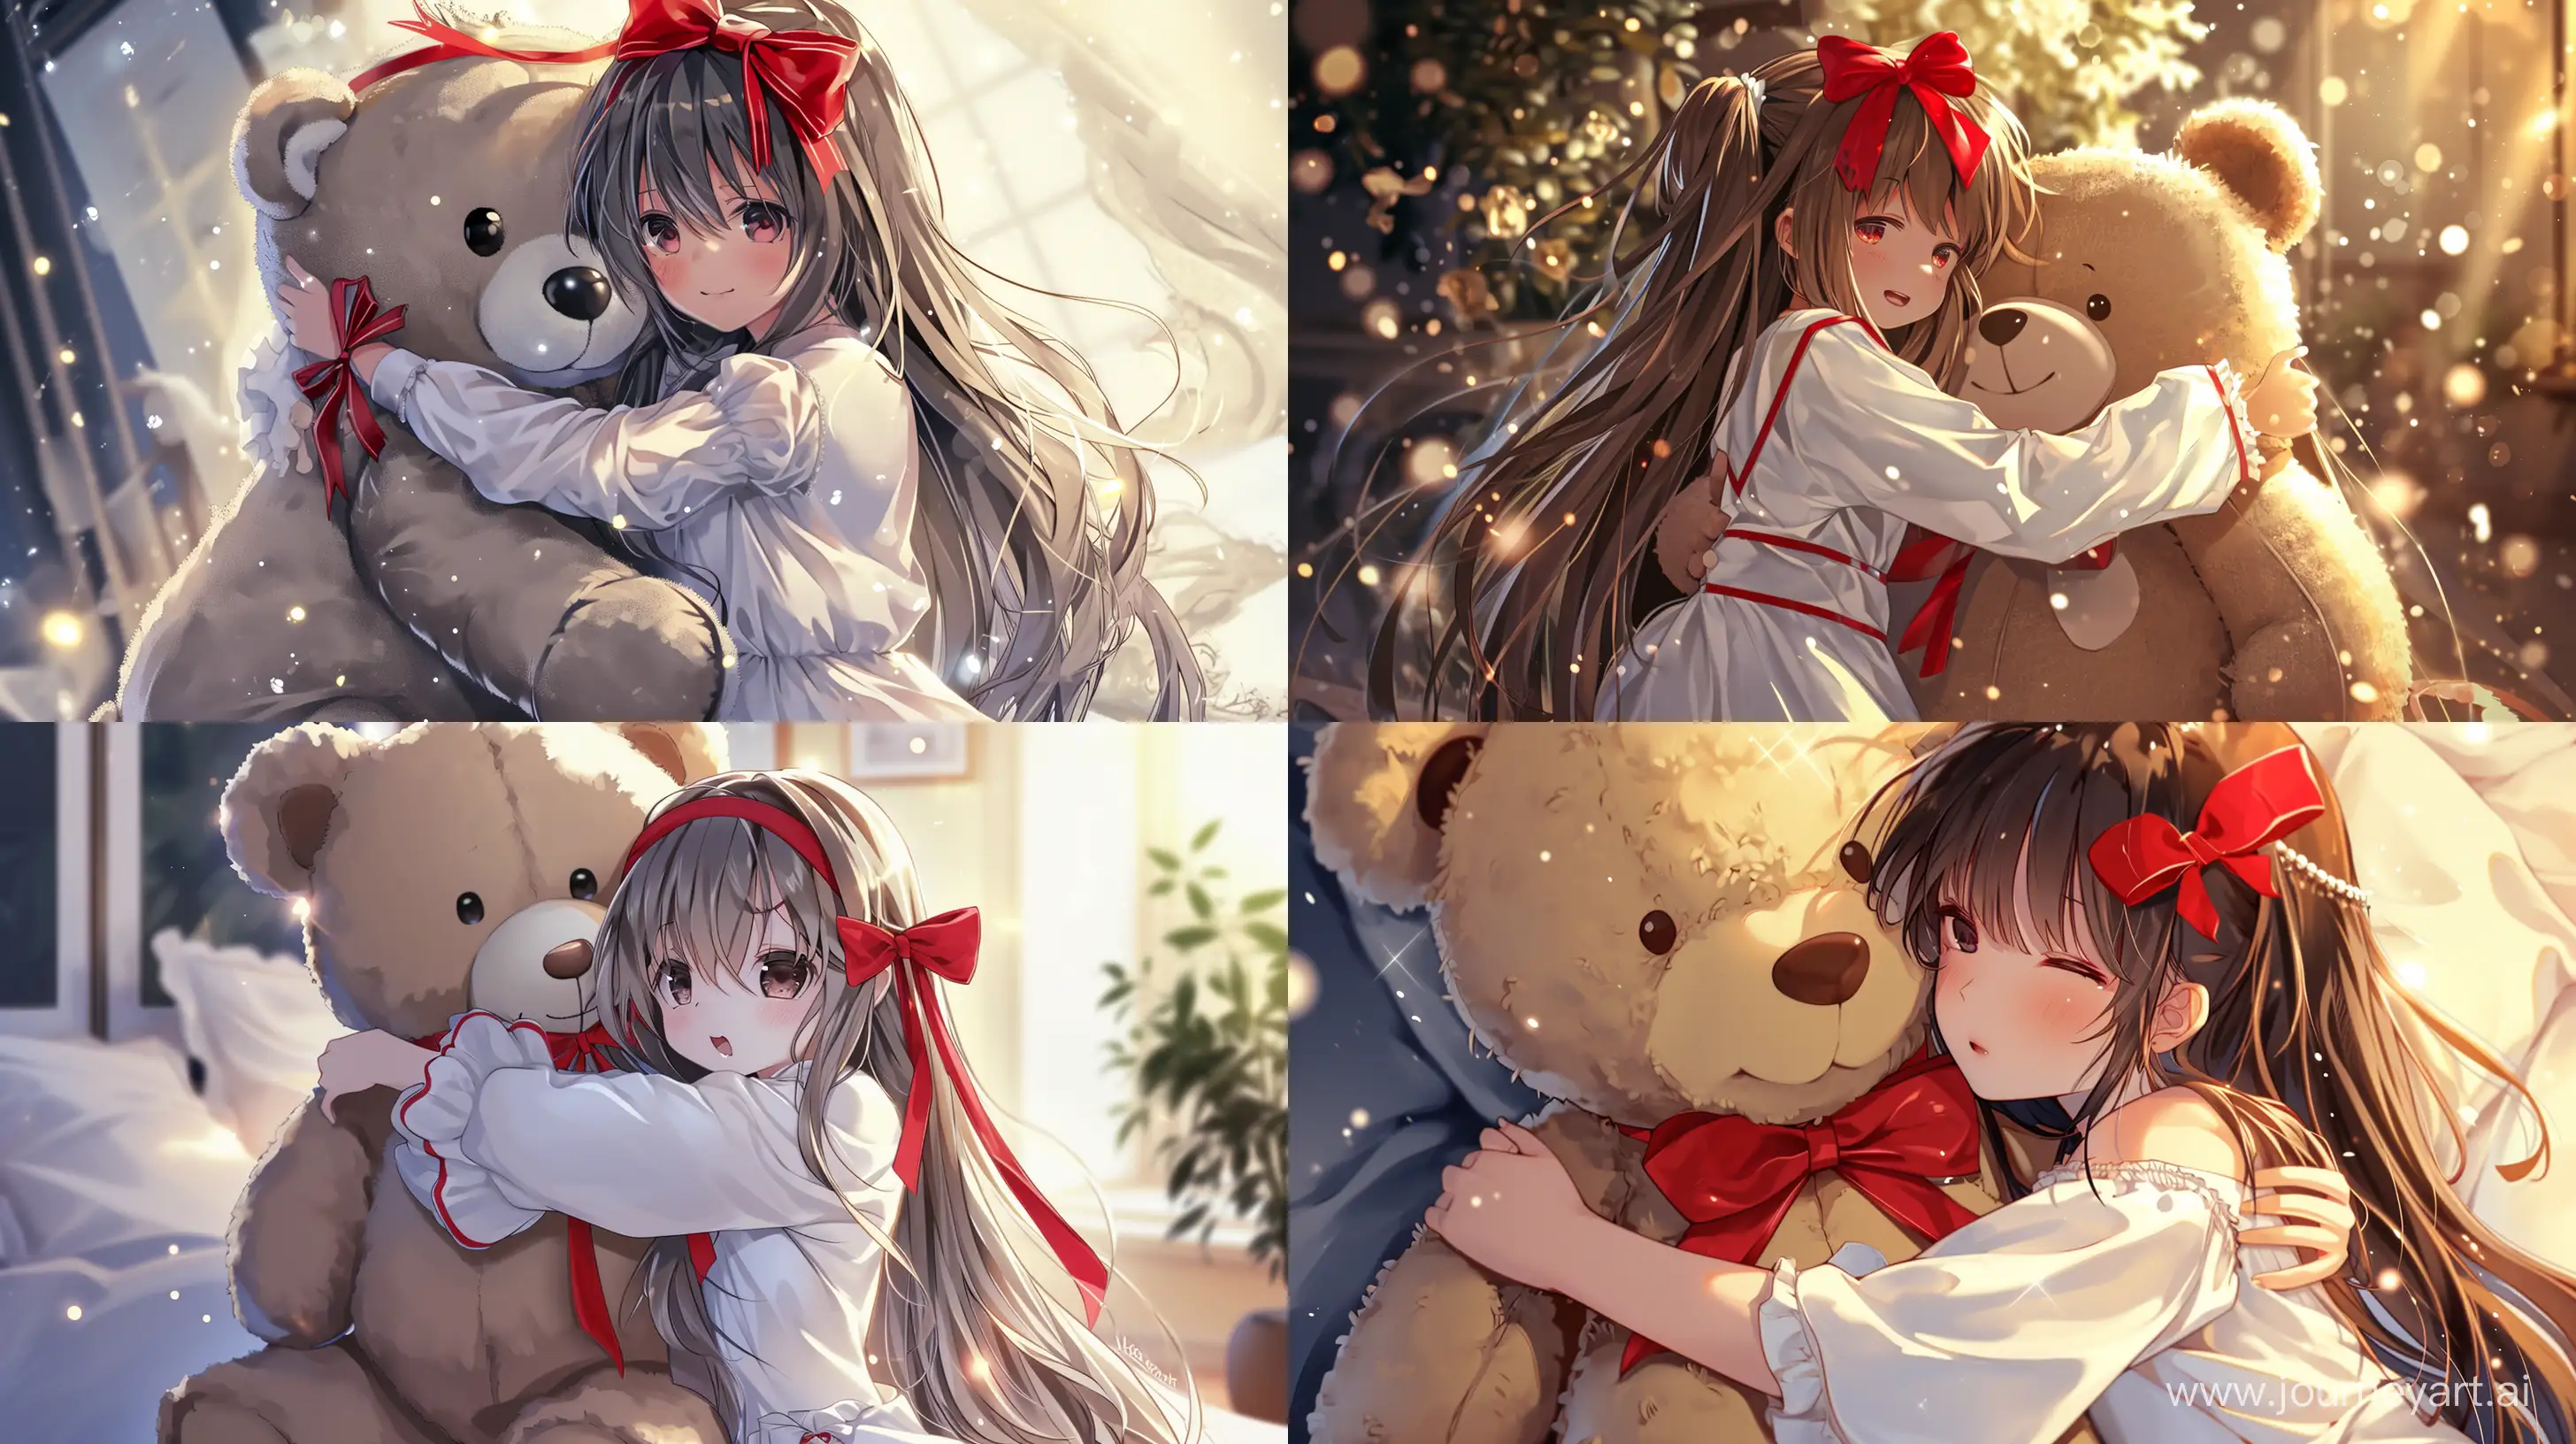 Adorable-Anime-Girl-Embracing-Giant-Teddy-Bear-in-Detailed-Nightgown-Art